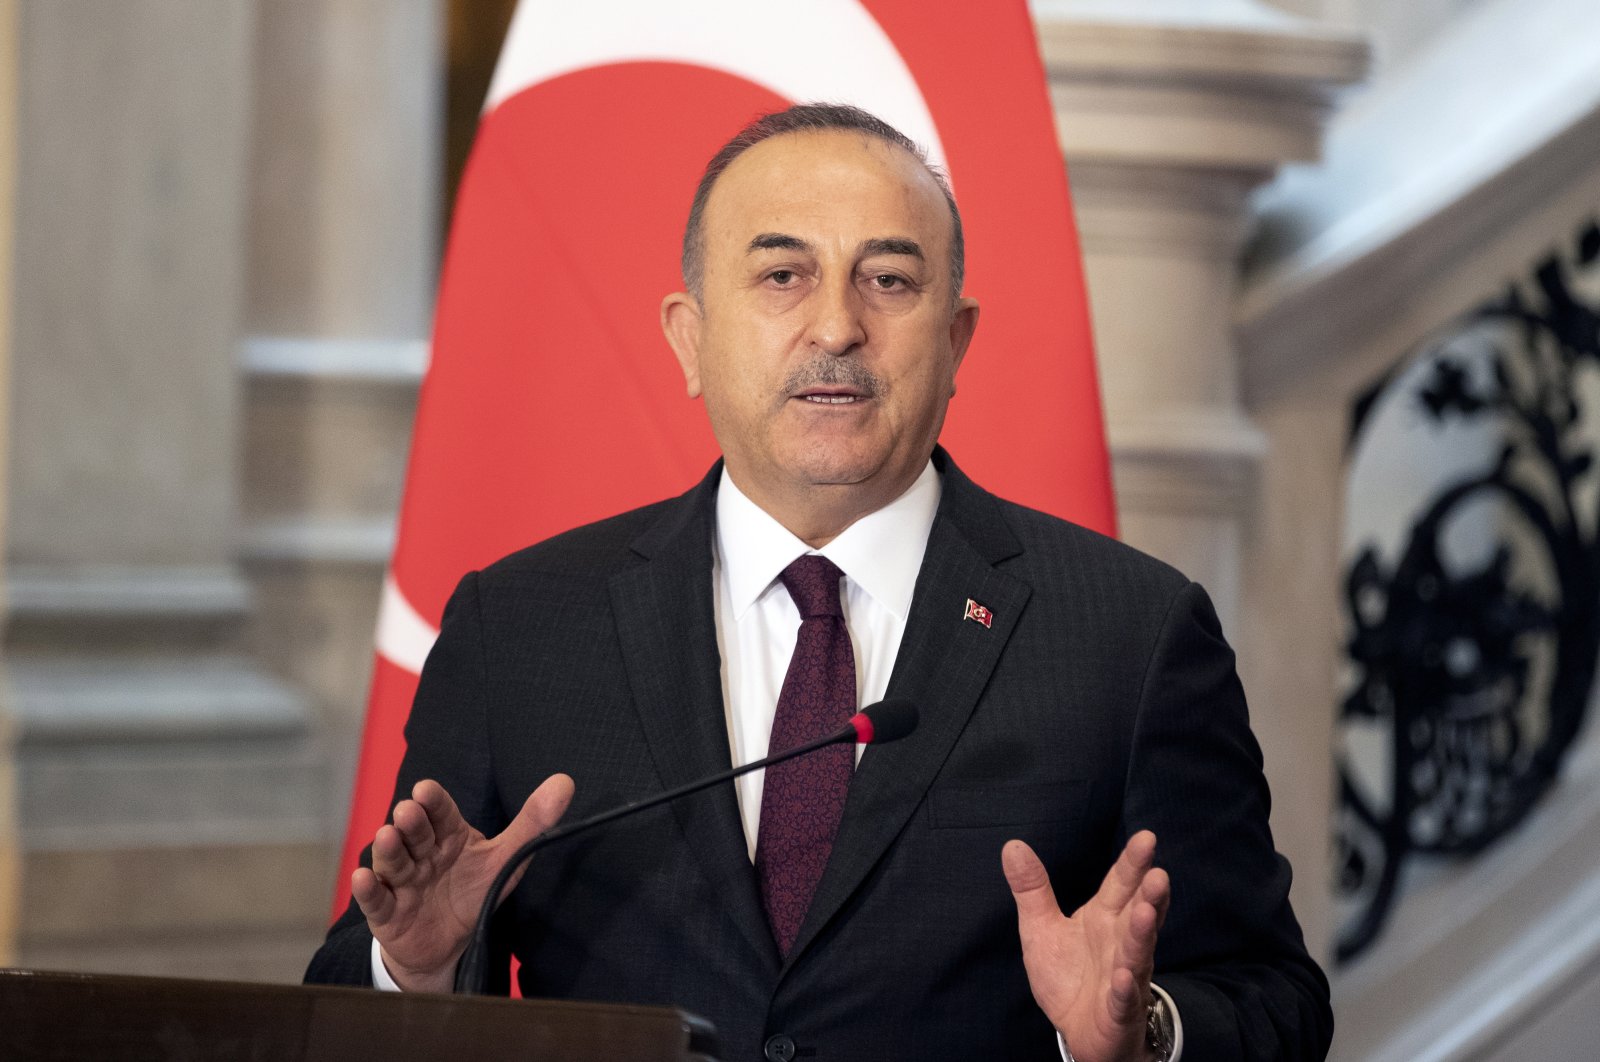 Foreign Minister Mevlüt Çavuşoğlu speaks during a joint news conference with his Egyptian counterpart, in Cairo, Egypt, March 18, 2023. (EPA Photo)